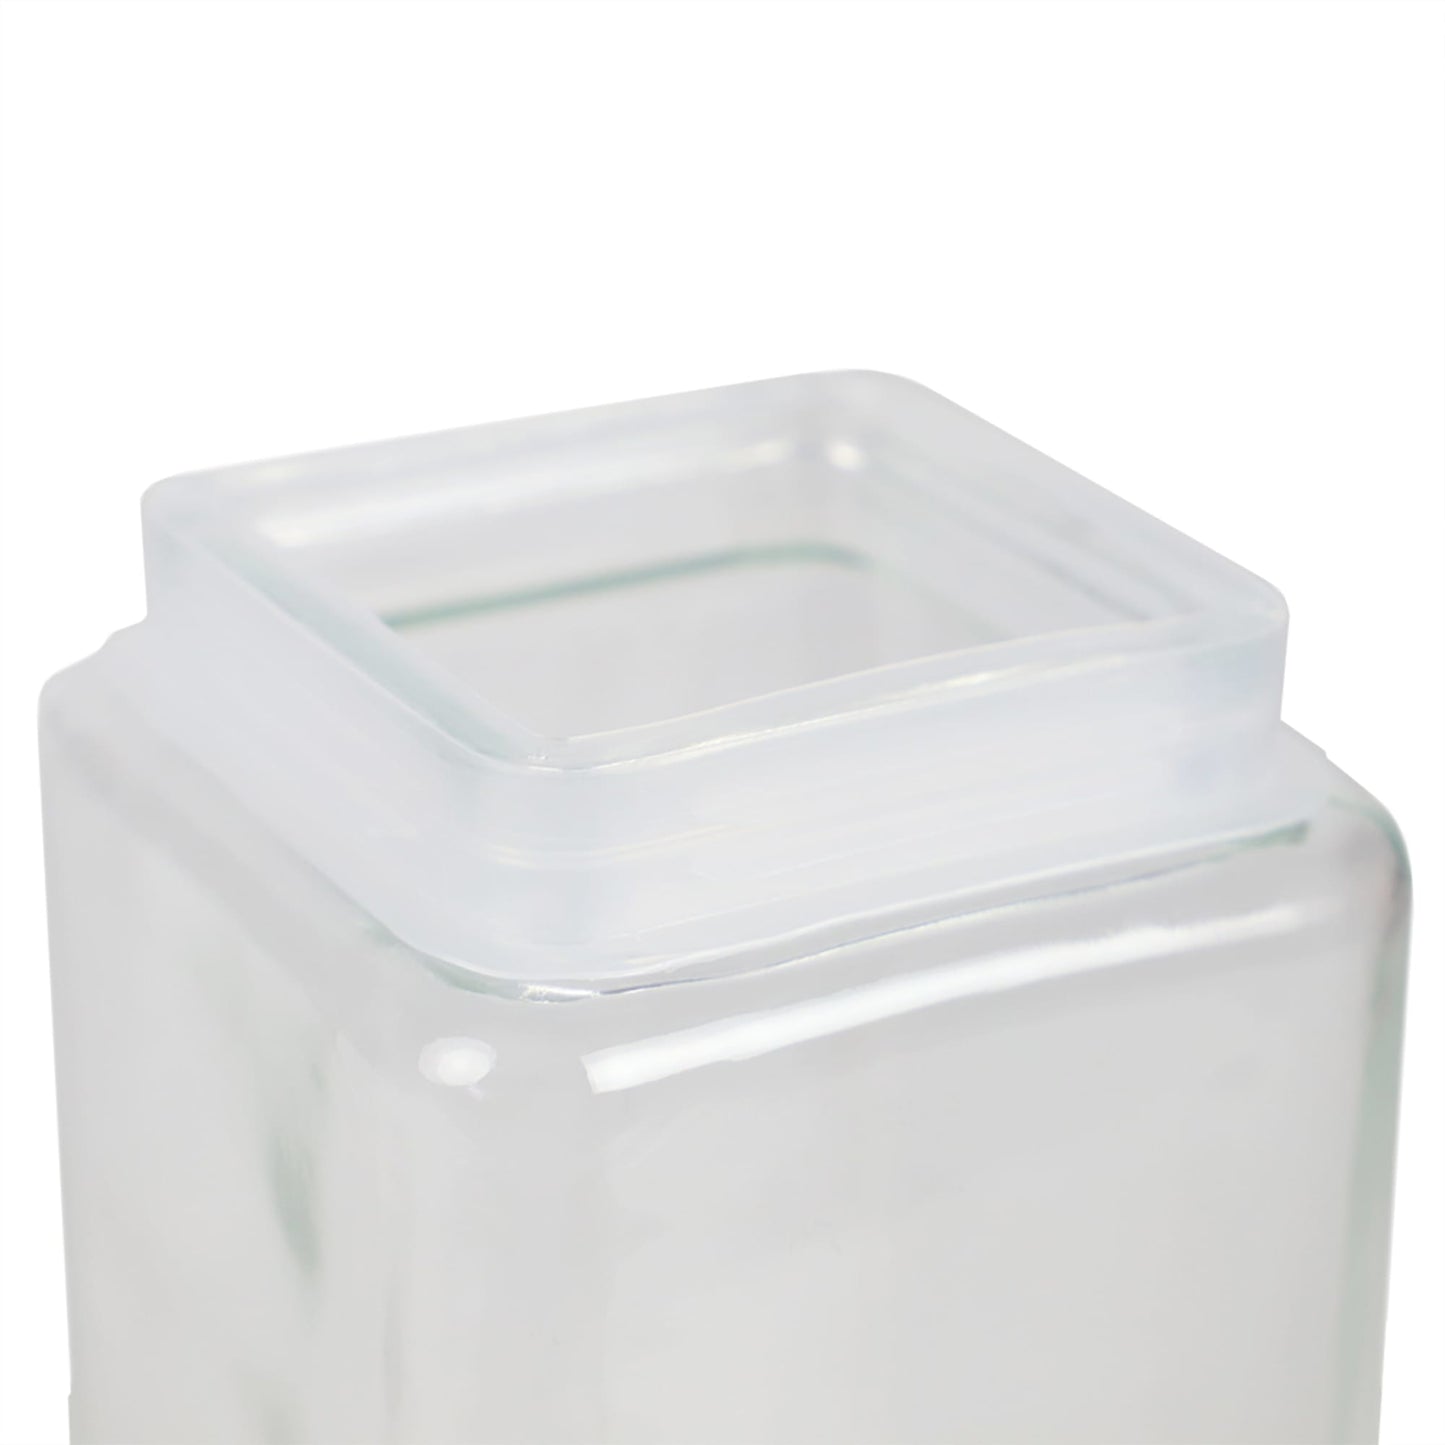 67 oz Square Glass Canister with Bamboo Lid